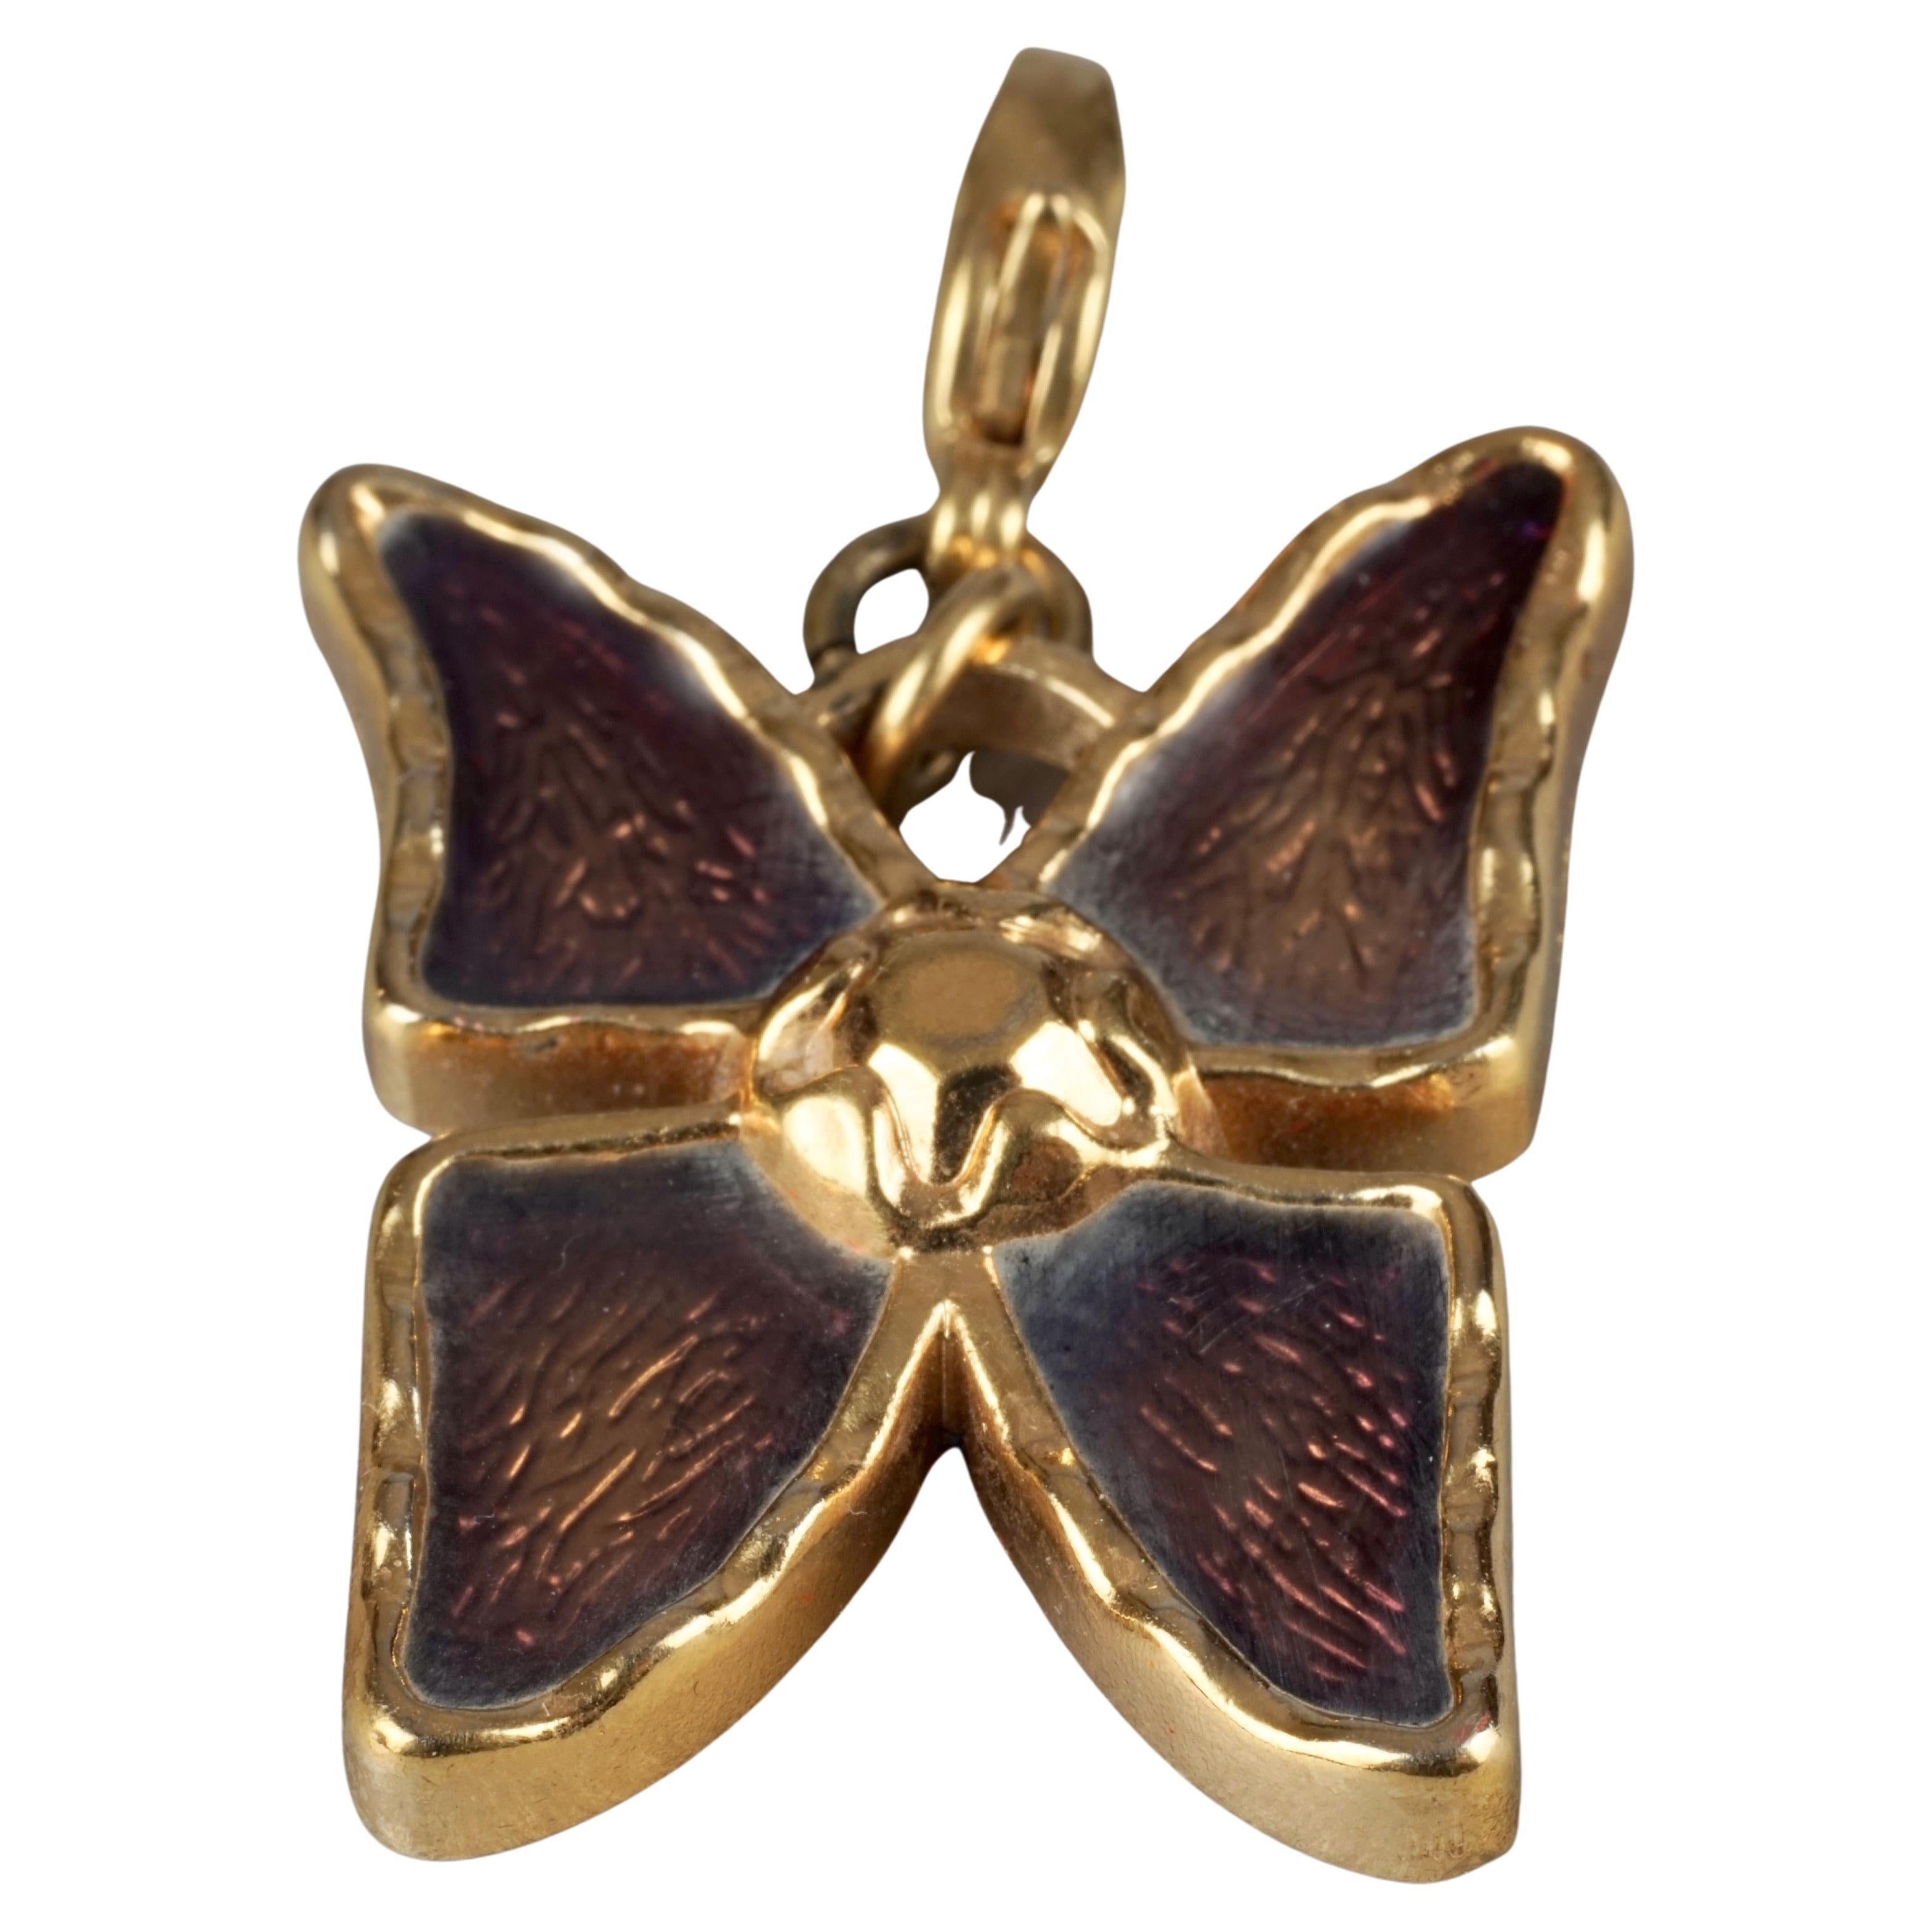 Vintage YVES SAINT LAURENT Ysl Butterfly Enamel Charm Pendant Necklace

Measurements:
Height: 1.30 inches (3.3 cm)
Width: 1.06 inches (2.7 cm)

Features:
- 100% Authentic YVES SAINT LAURENT.
- Brown enamel butterfly charm/ pendant necklace.
-